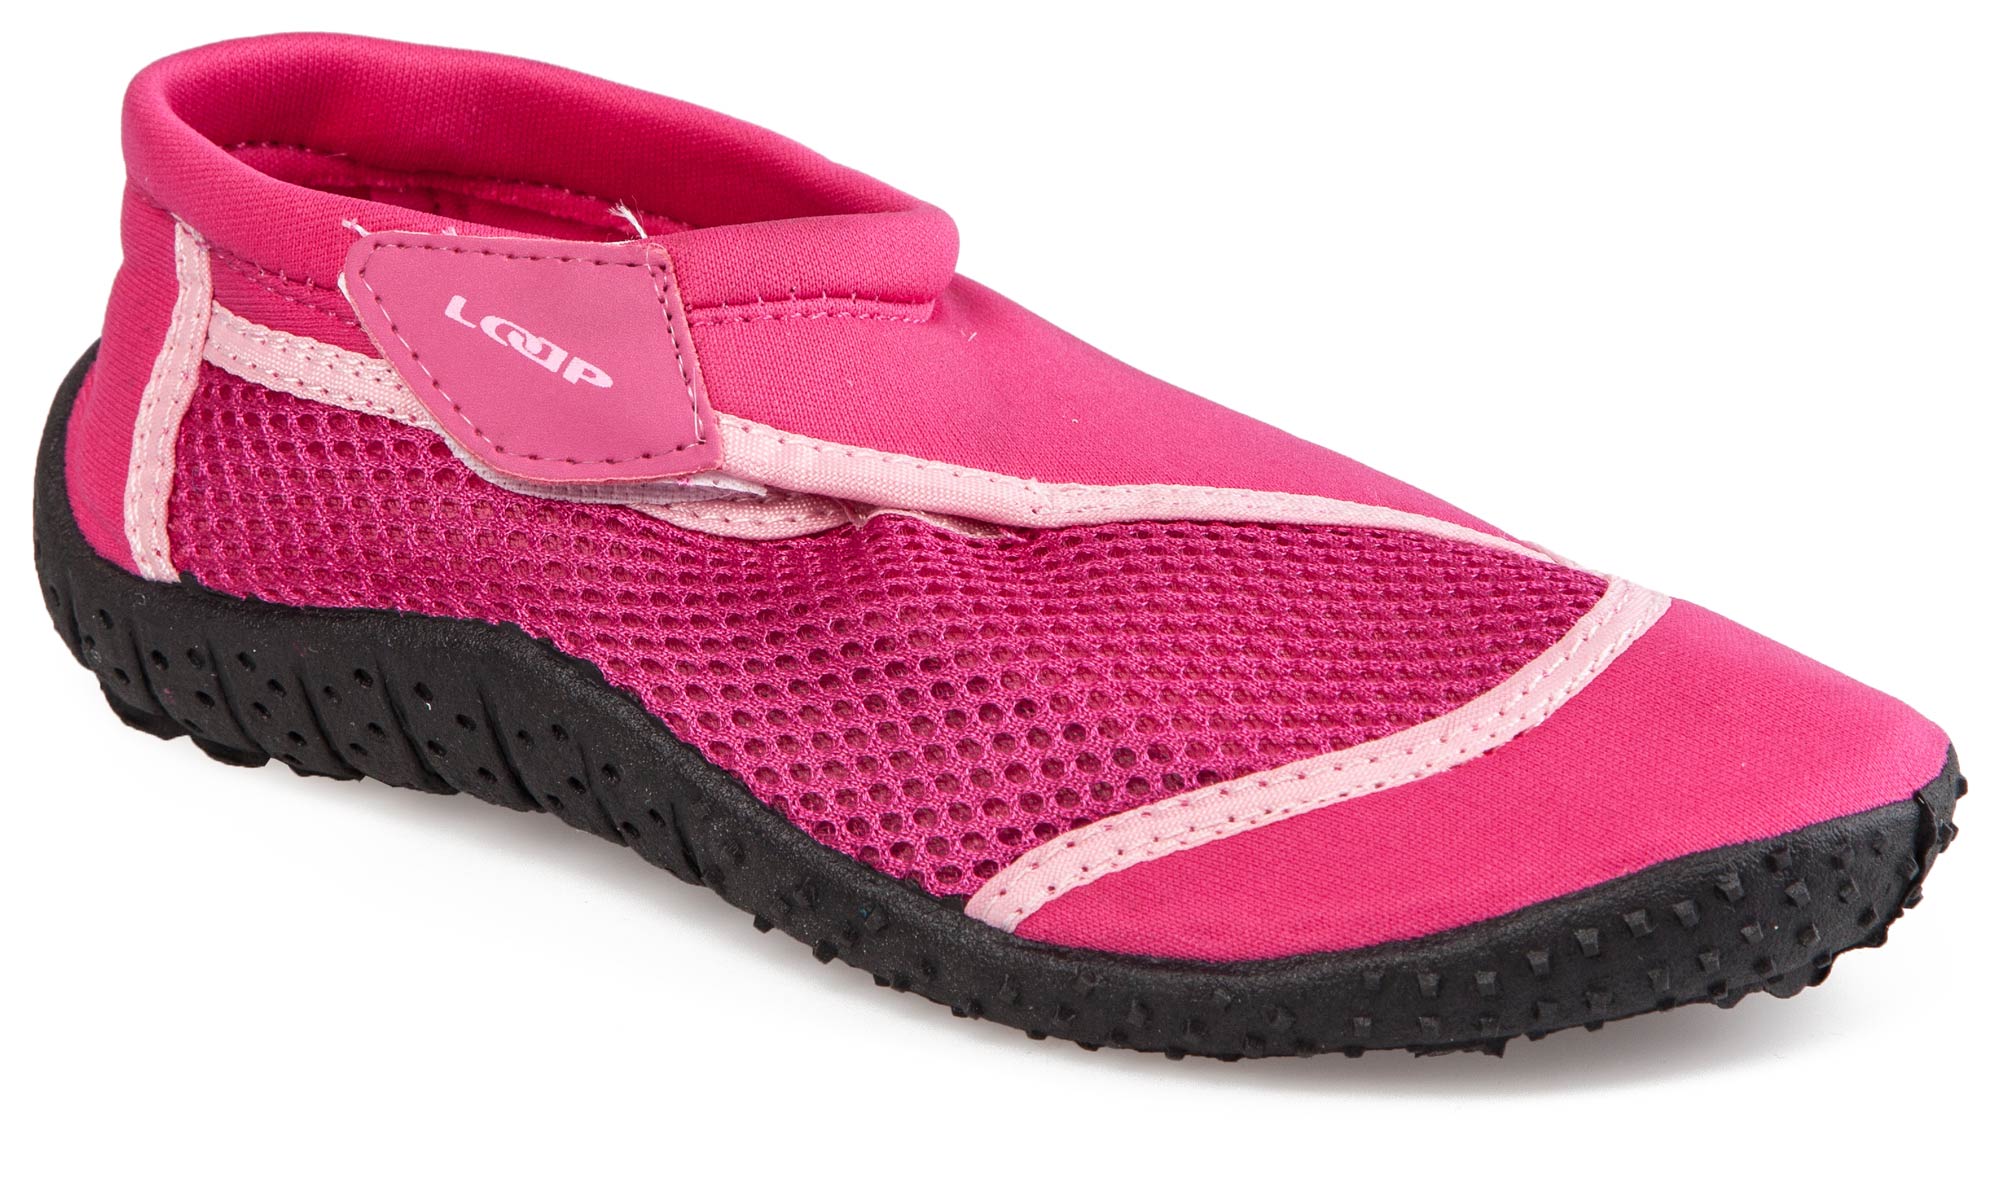 Kids’ water shoes